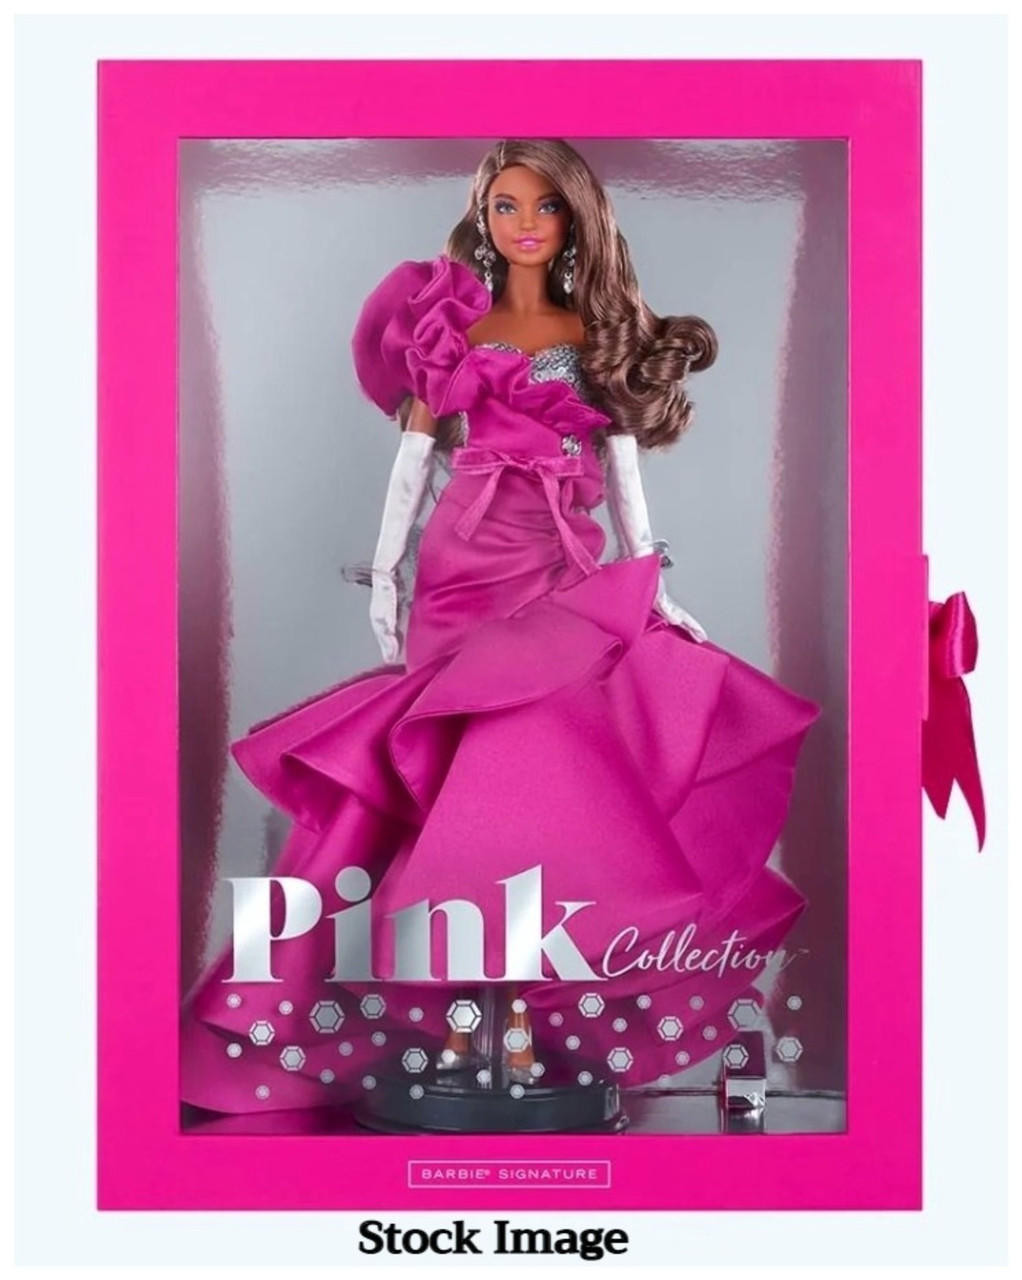 Barbie Signature Pink Collection Barbie Doll 2 African American AA 2021 NRFB